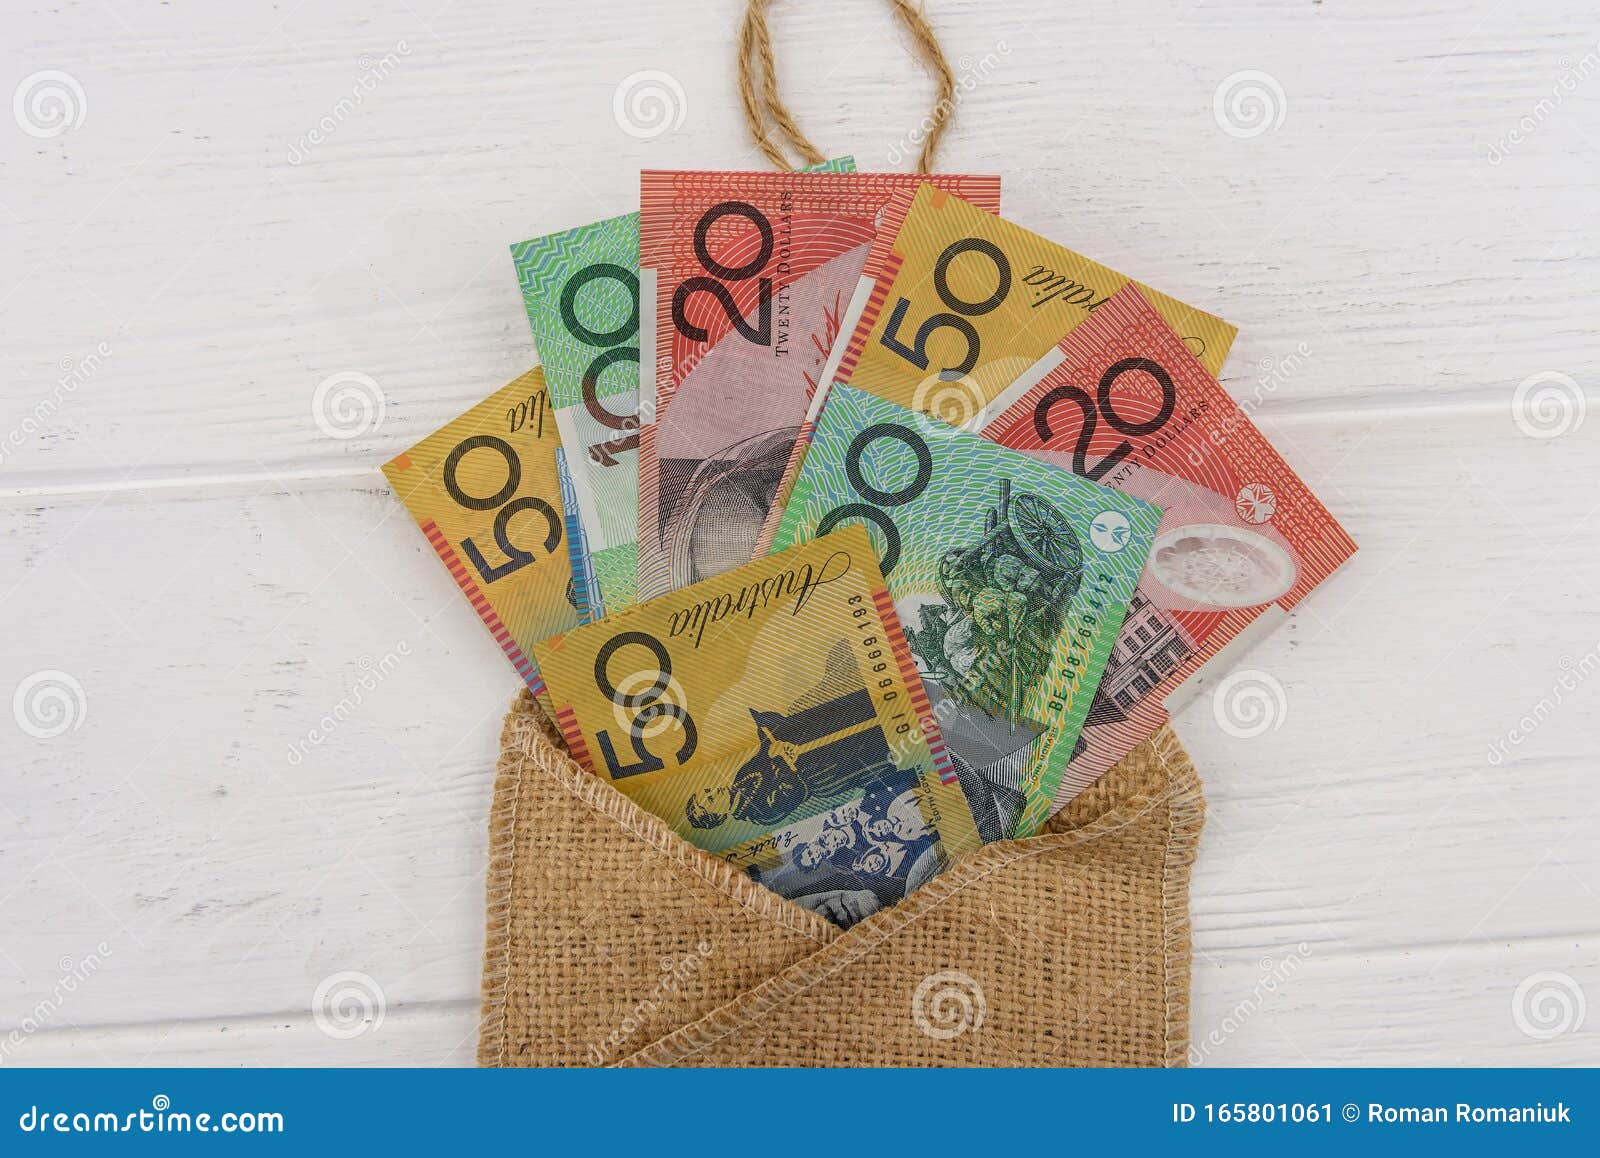 Australian Dollar Banknotes with Material Envelope on Light Background Image saving, object: 165801061